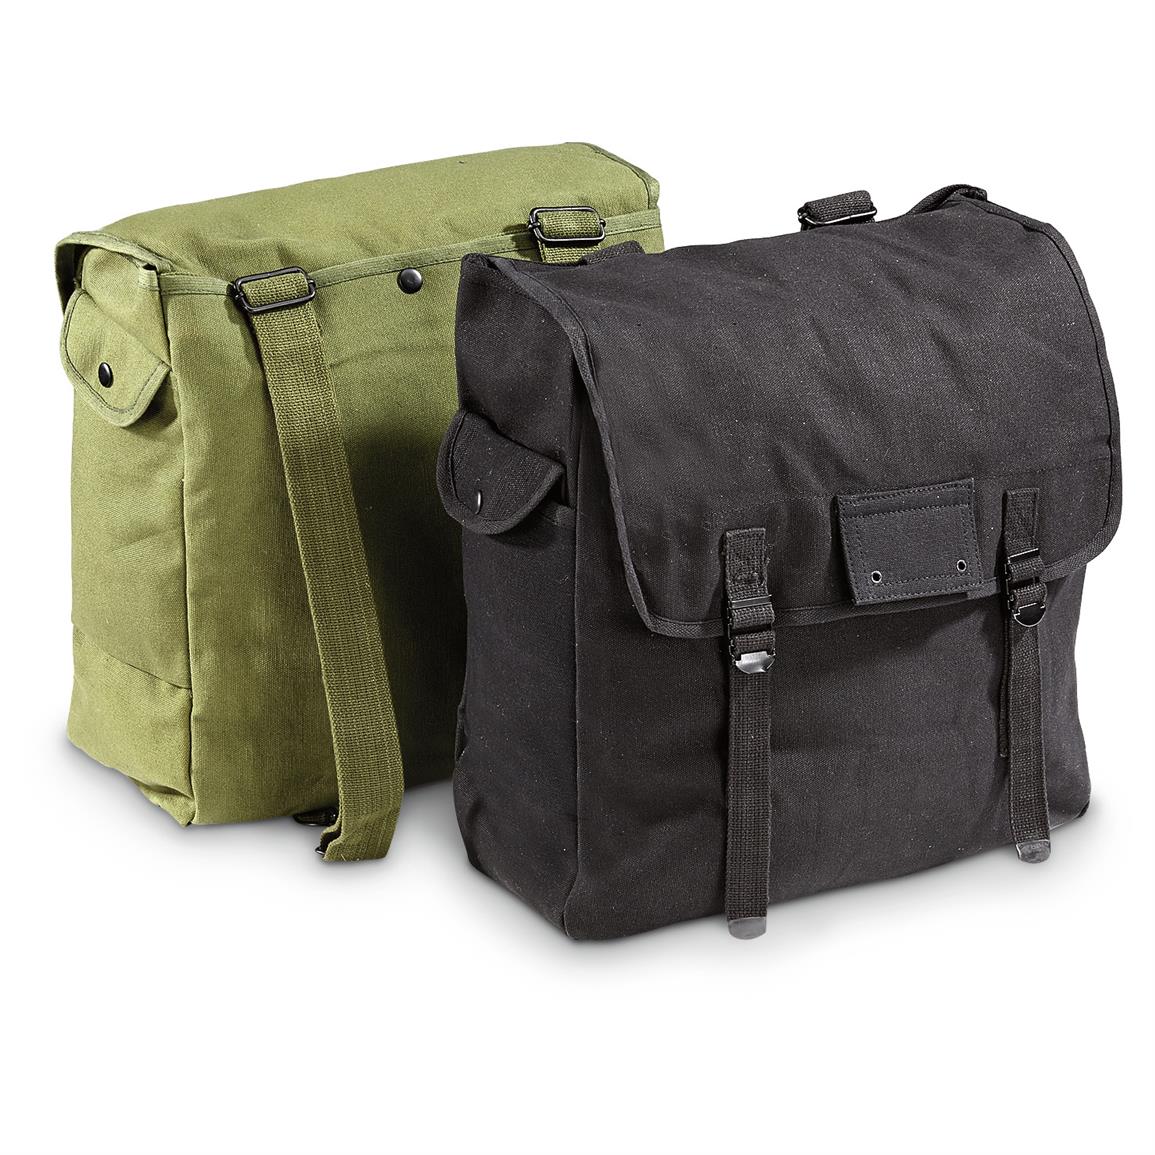 Military-style Canvas Mussette Bag - 652996, Military Style Backpacks & Bags at Sportsman&#39;s Guide